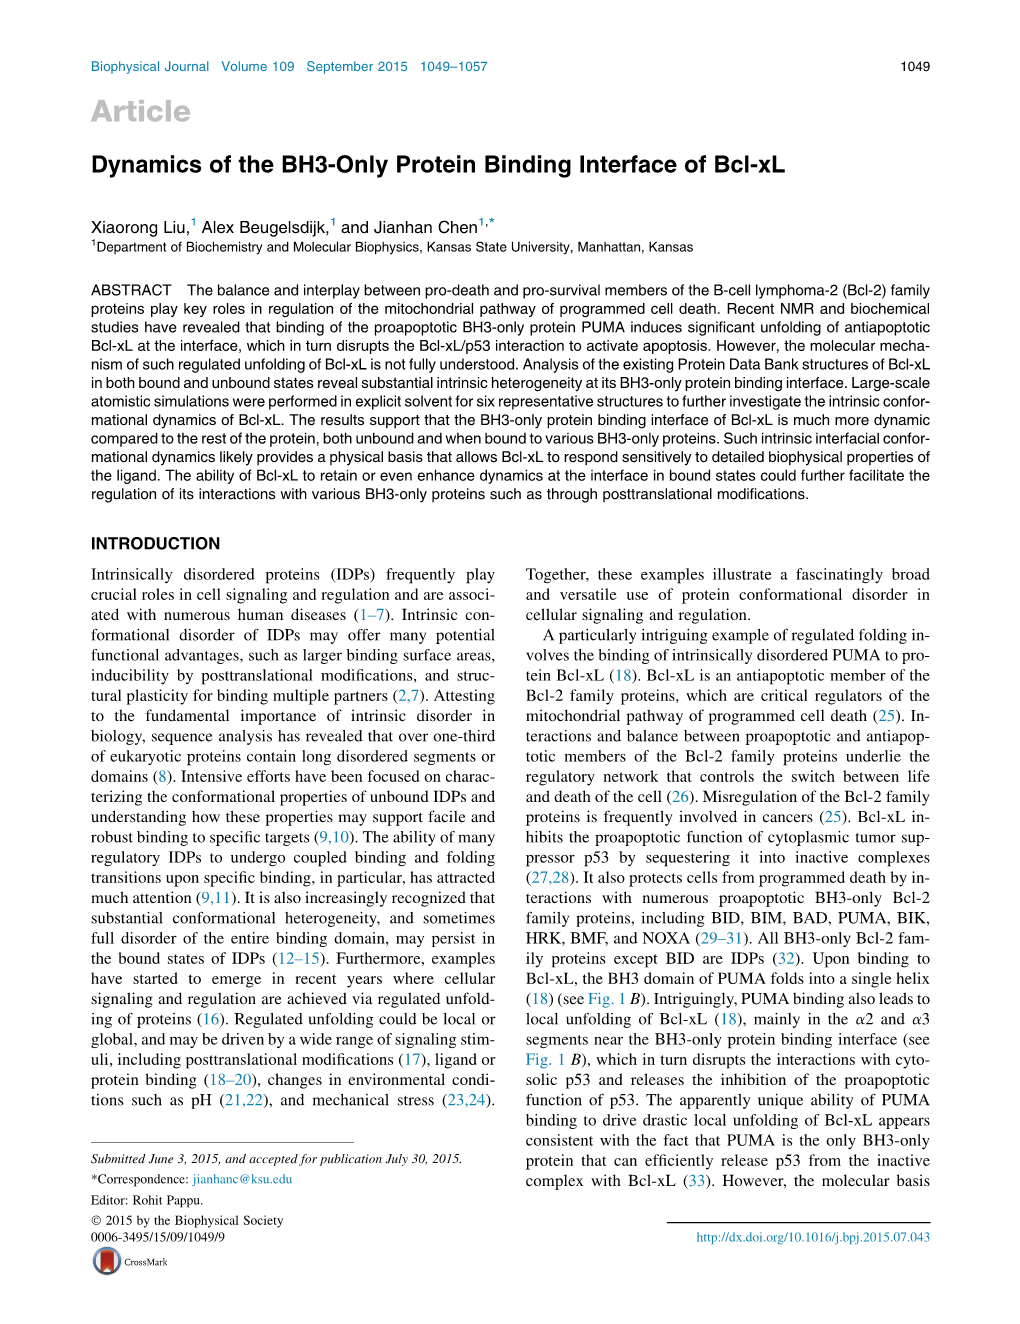 Dynamics of the BH3-Only Protein Binding Interface of Bcl-Xl